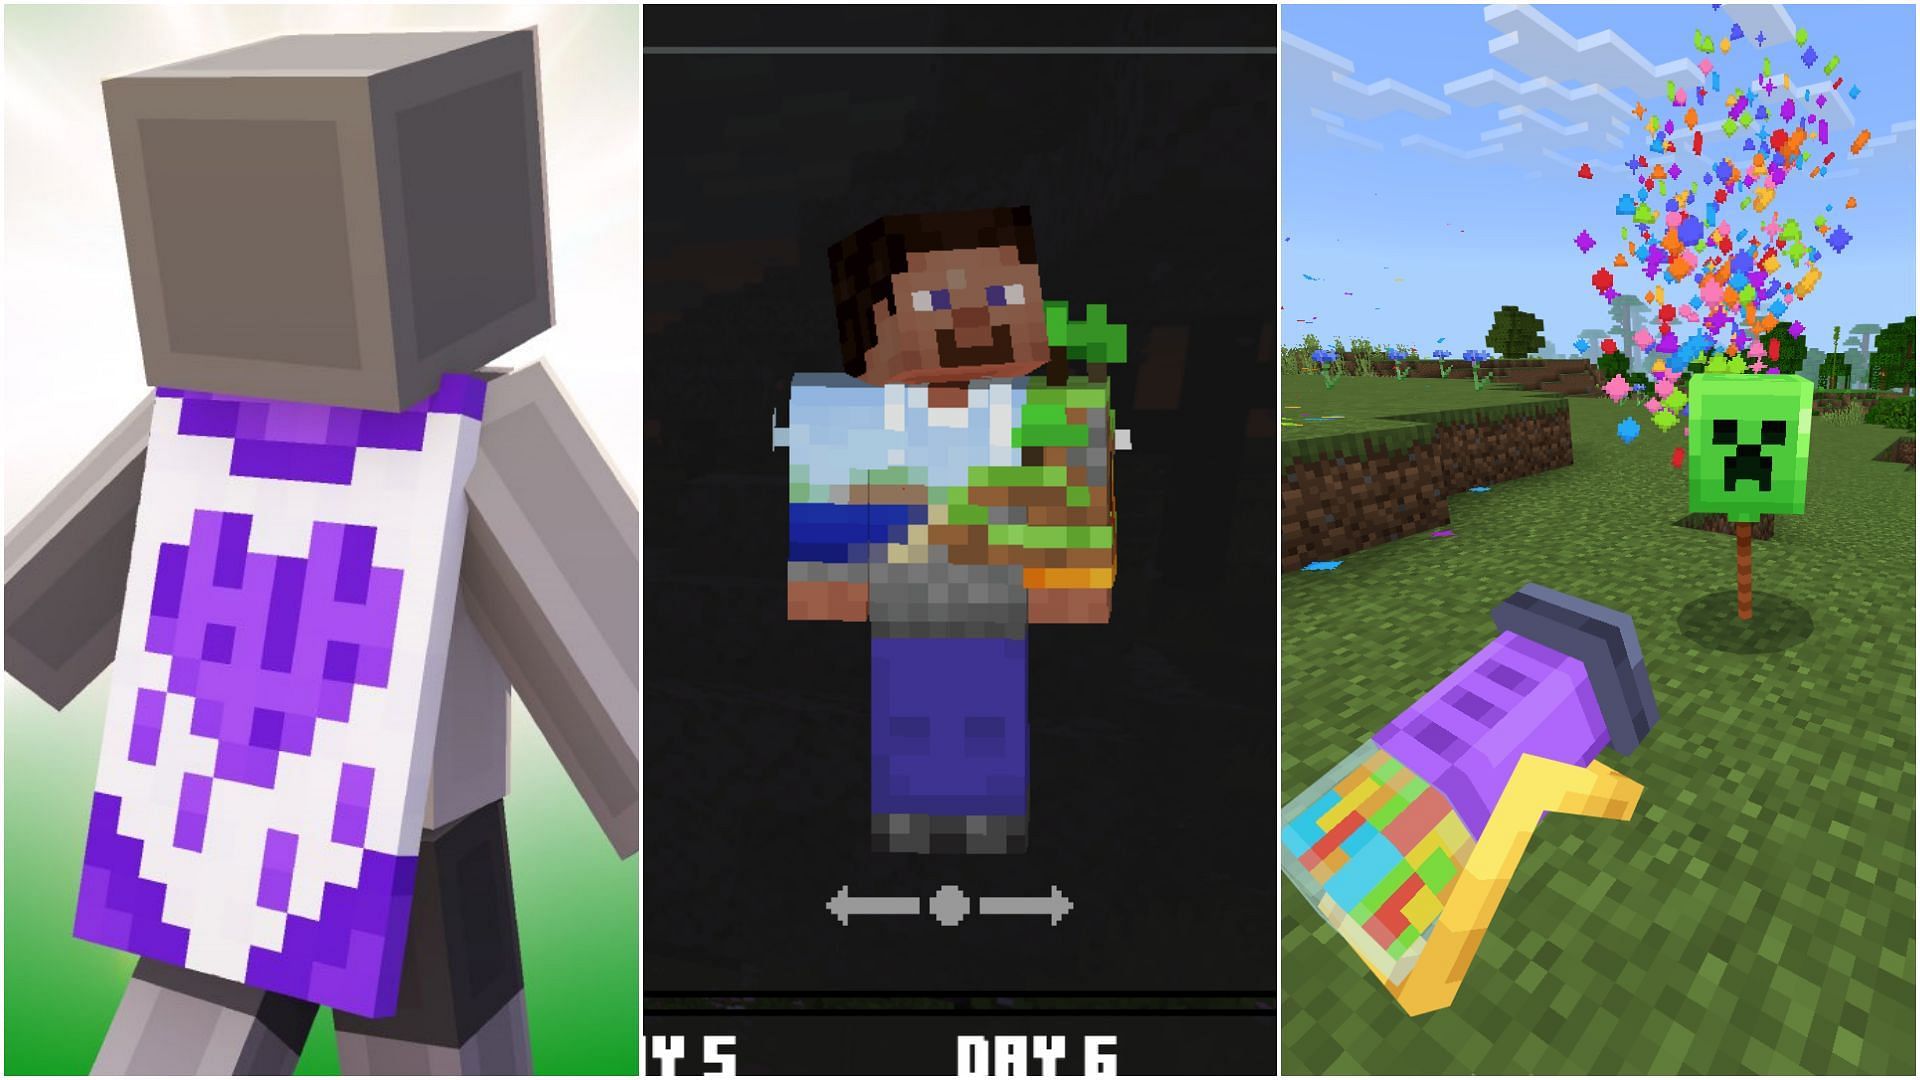 Minecraft Bedrock Edition has loads of extra features compared to Java Editions (Image via Mojang Studios)